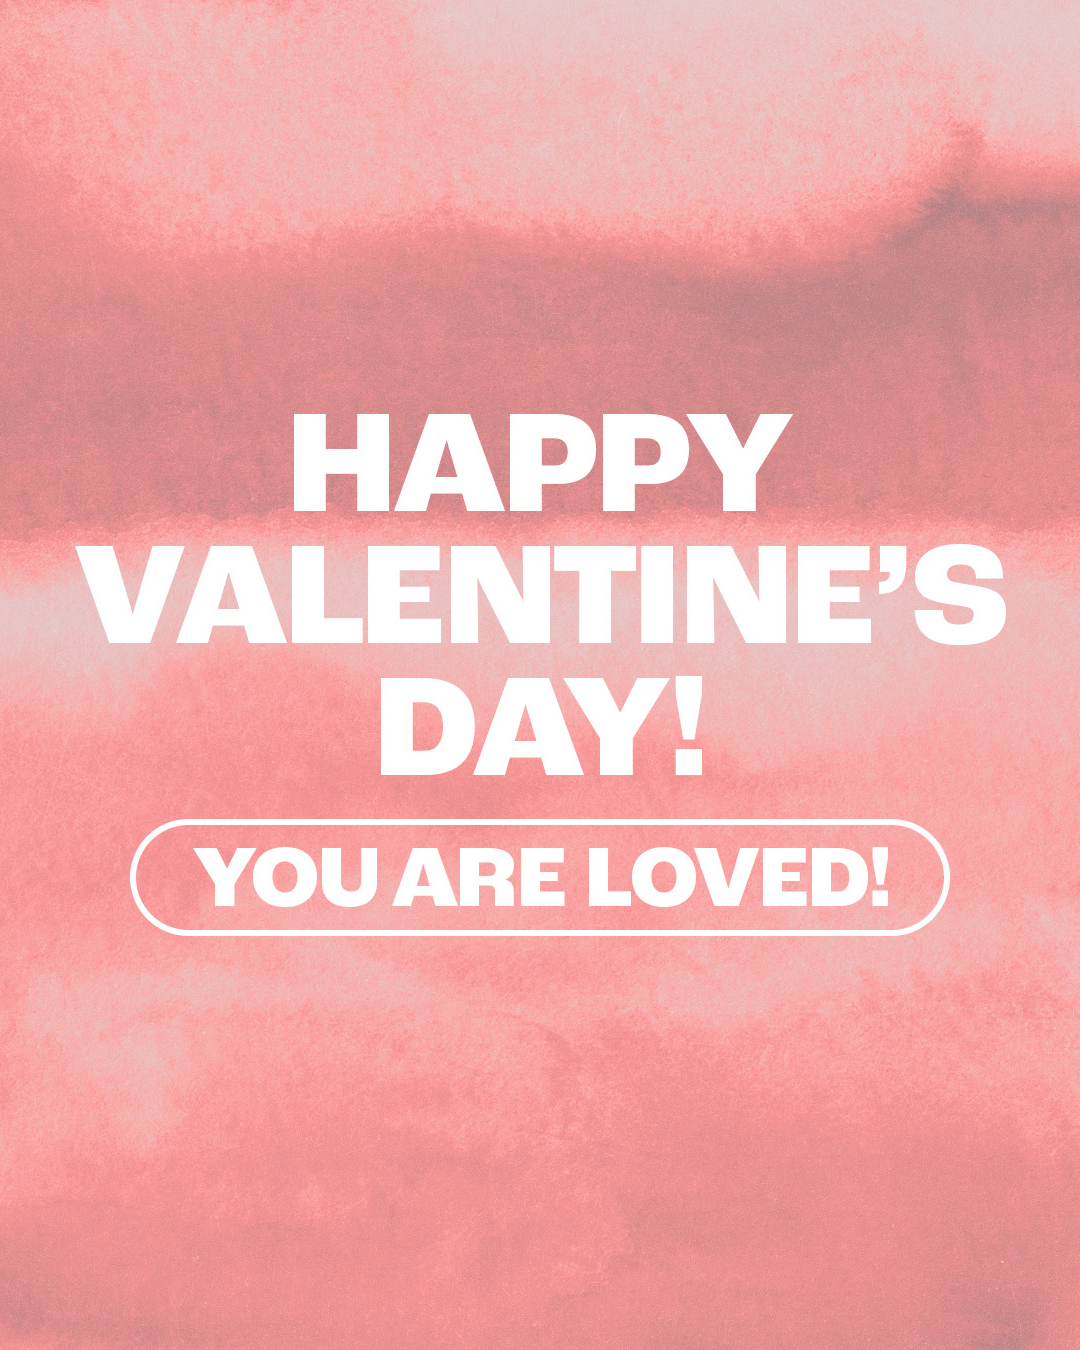 Happy Valentine’s Day! You are loved